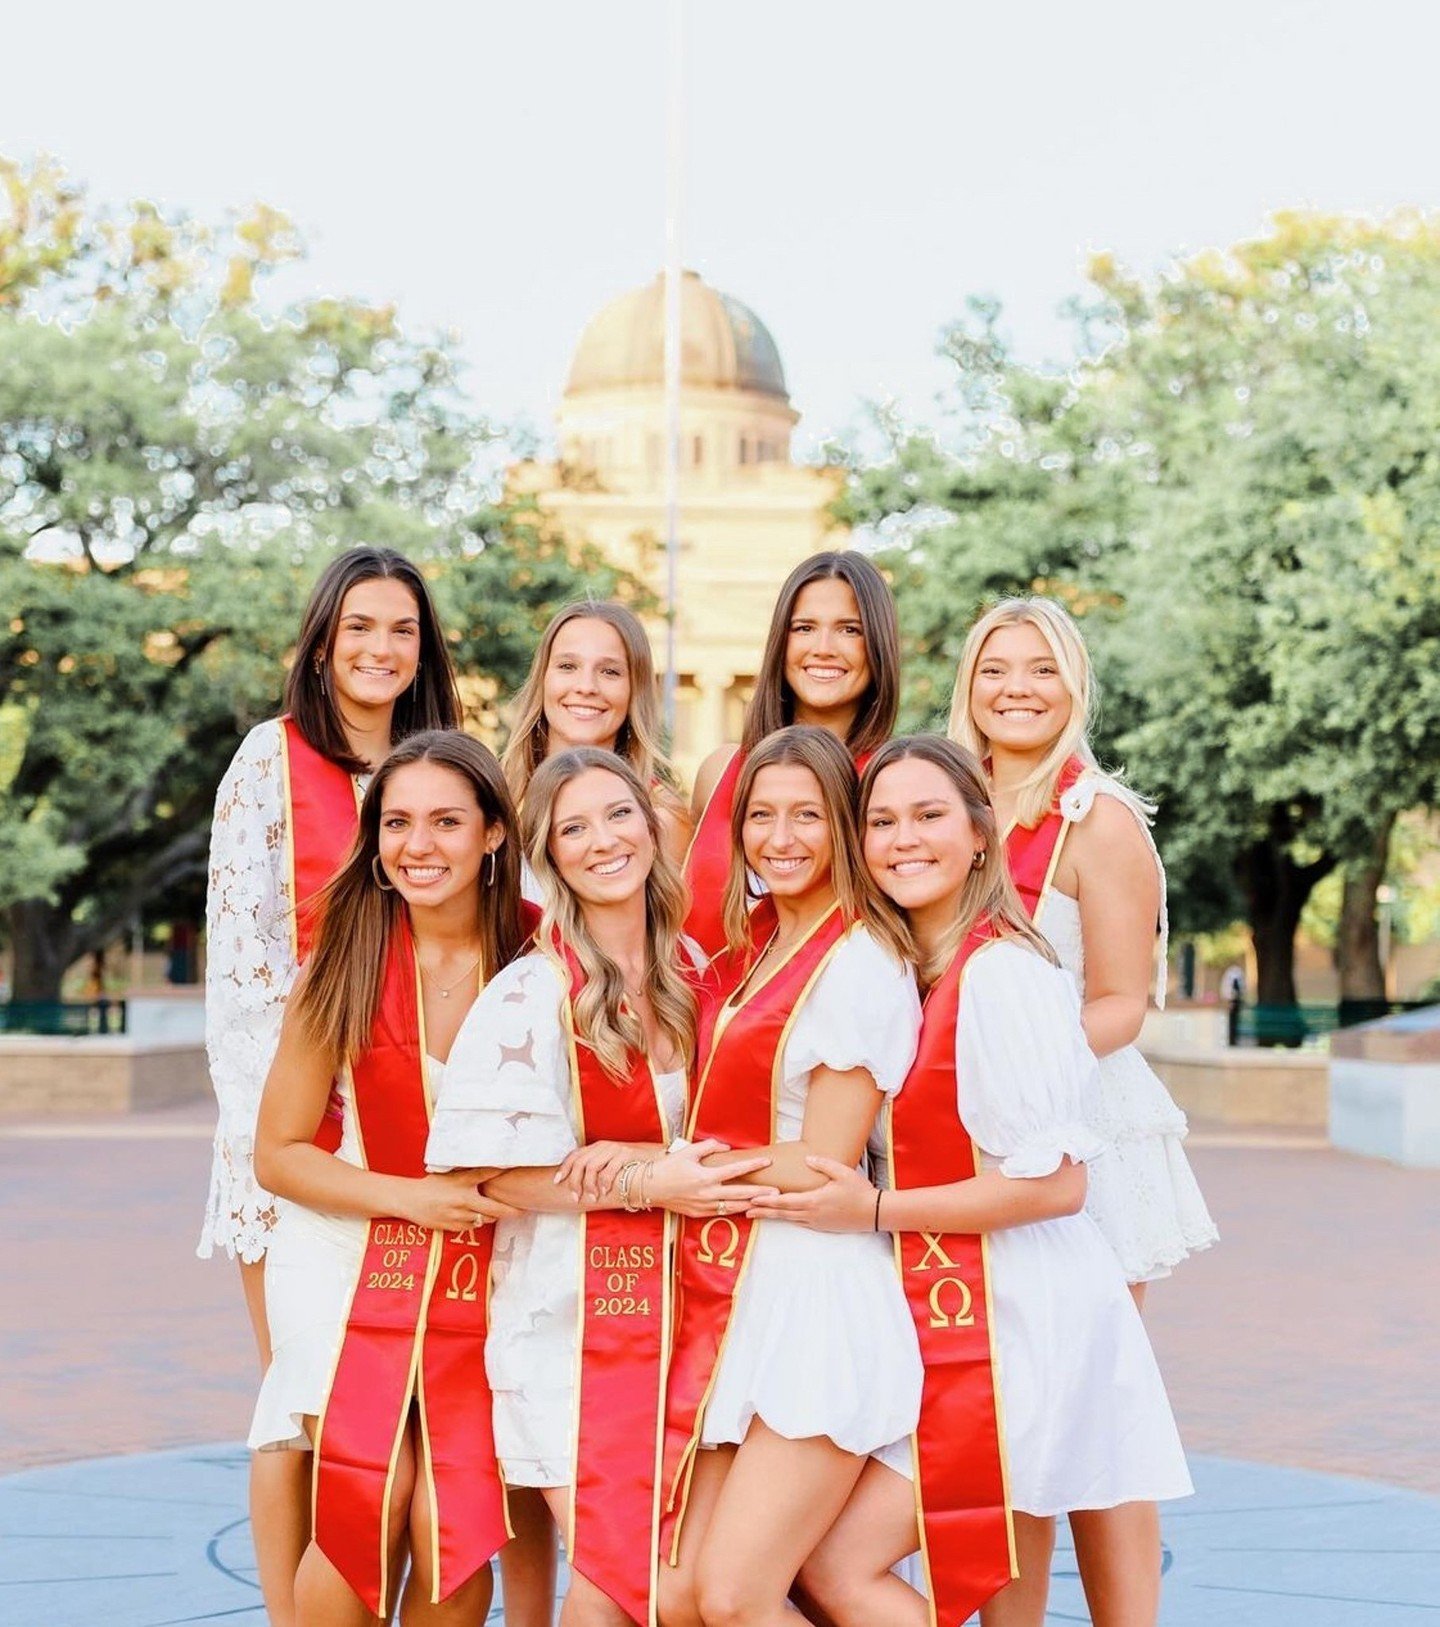 Congrats to our 2024 graduates! Our Sisterhood may have started on campus, but it&rsquo;s far from over! Chi Omega Yours Forever ❤️💛🎓

Tag a Sister that got you through the last four years!